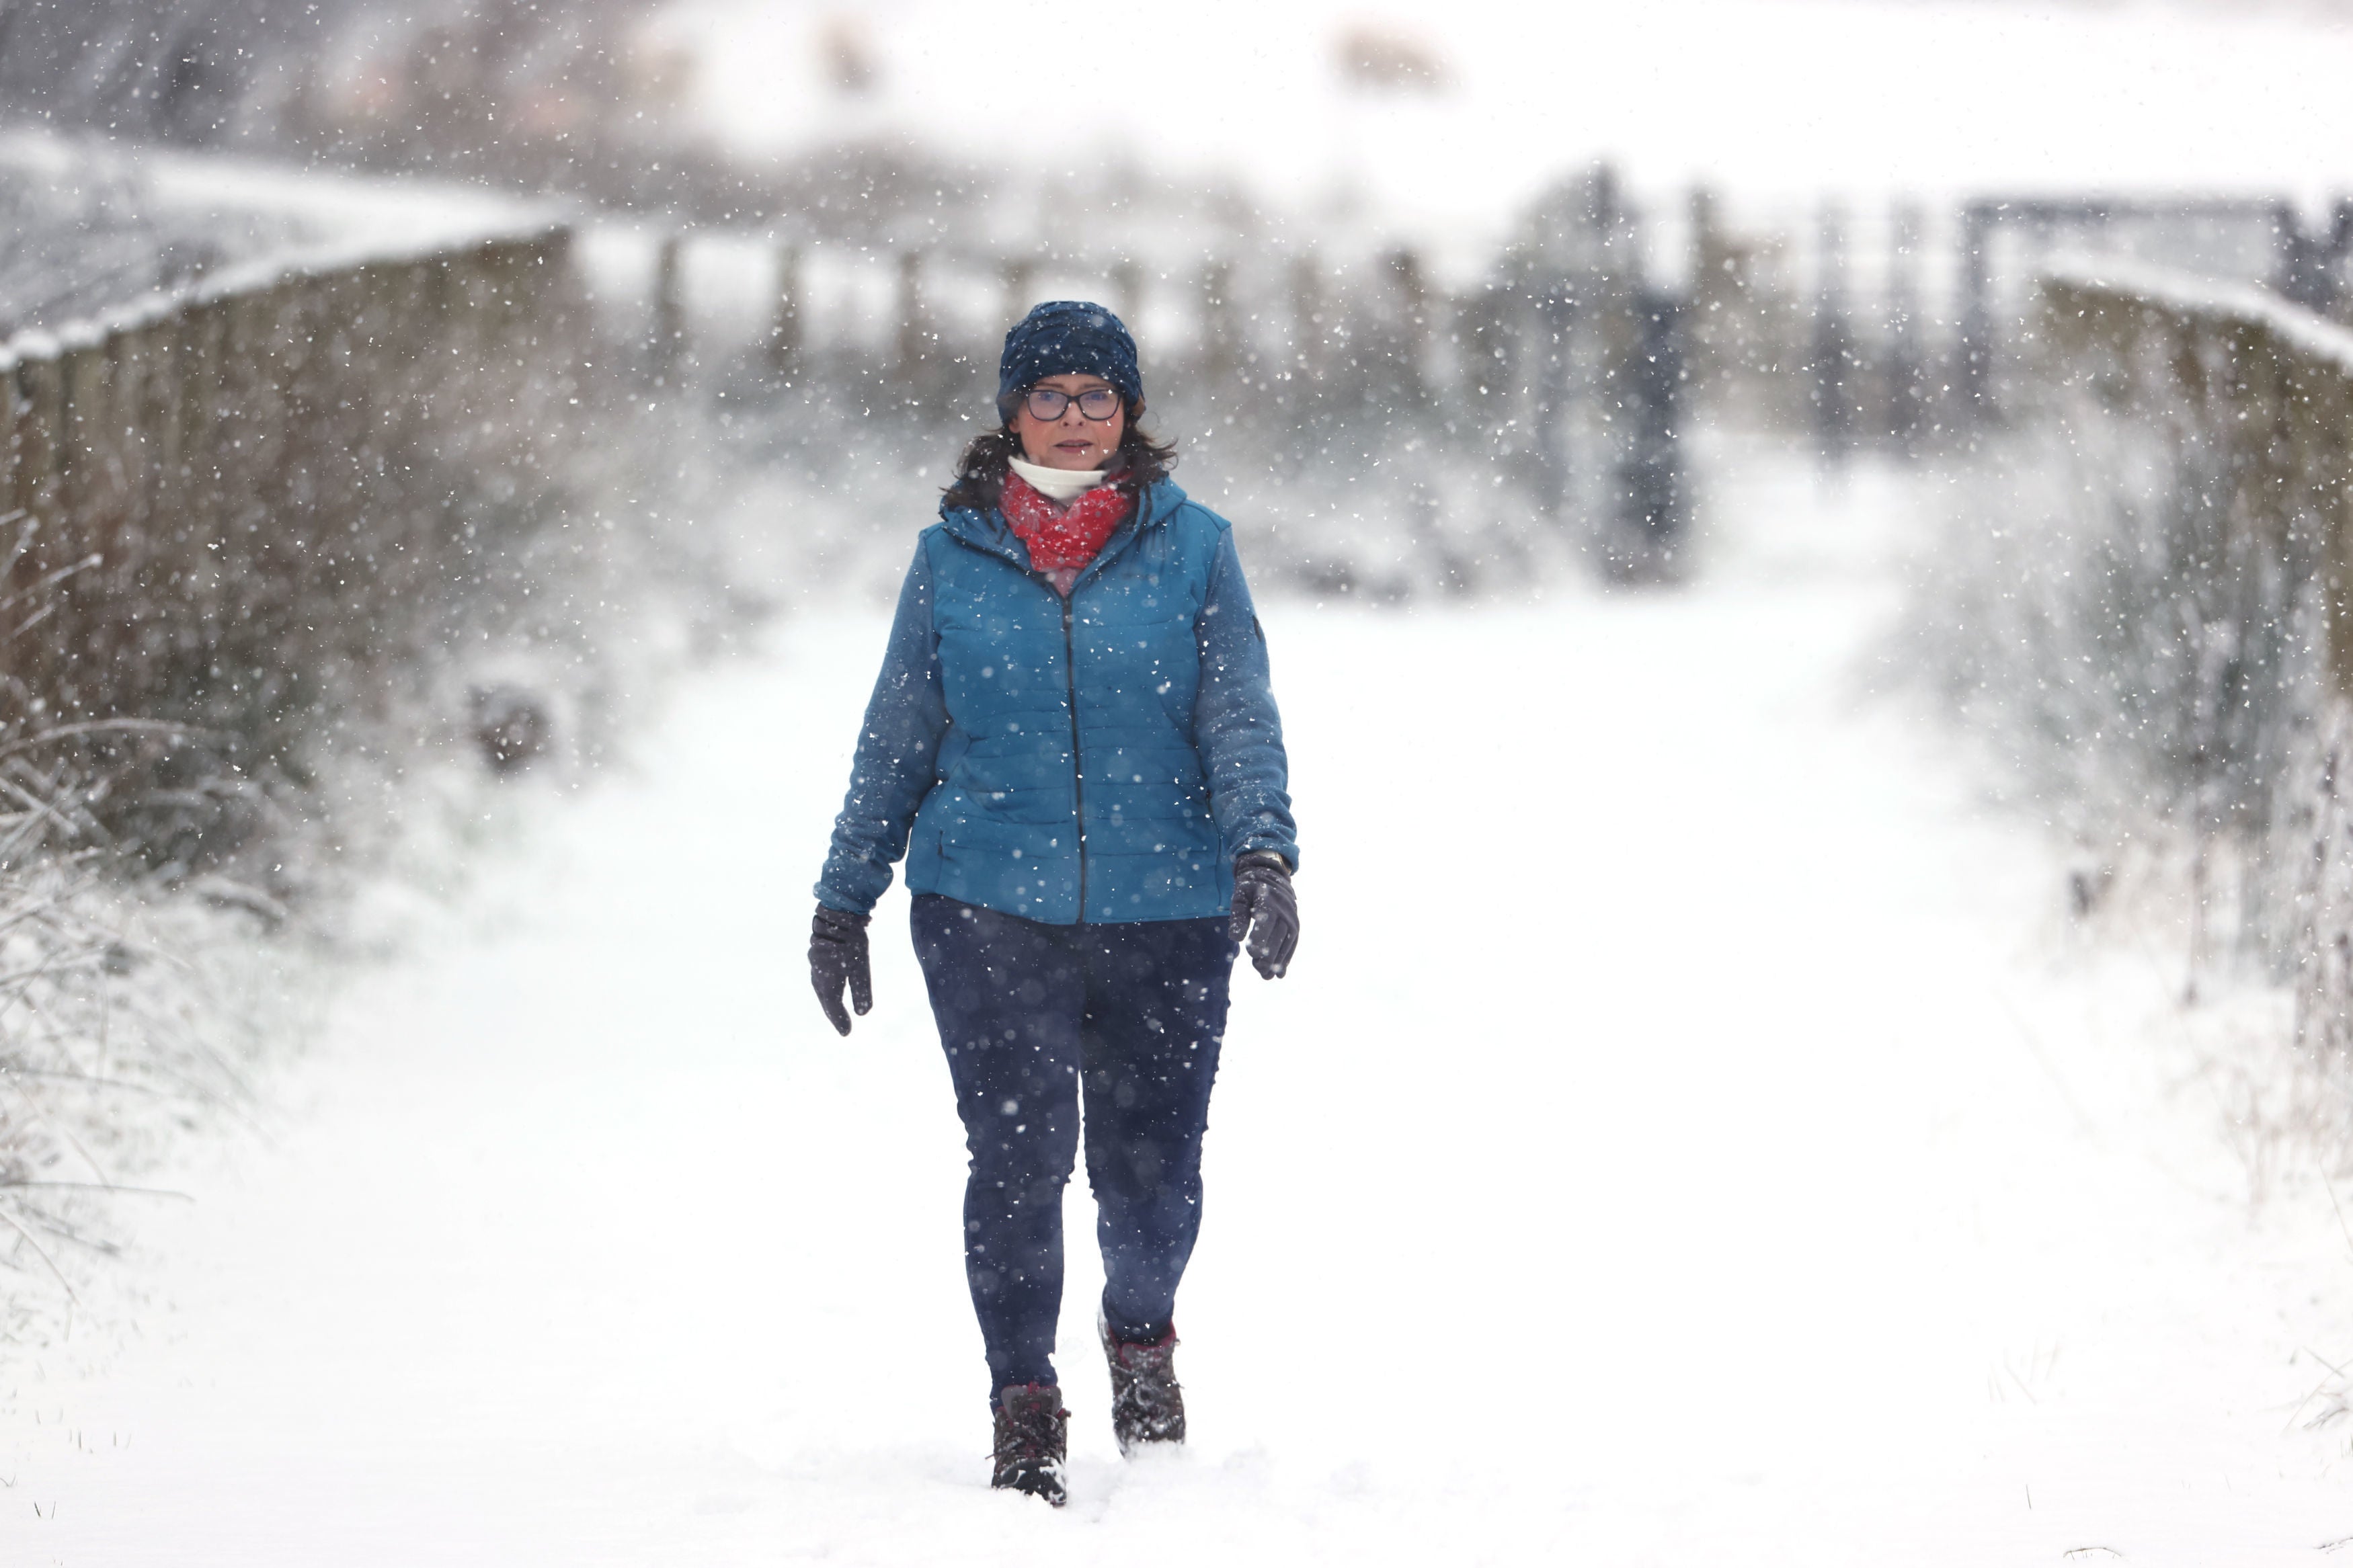 Davina Kerr walking in snowy conditions in Cargan, County Antrim on Tuesday